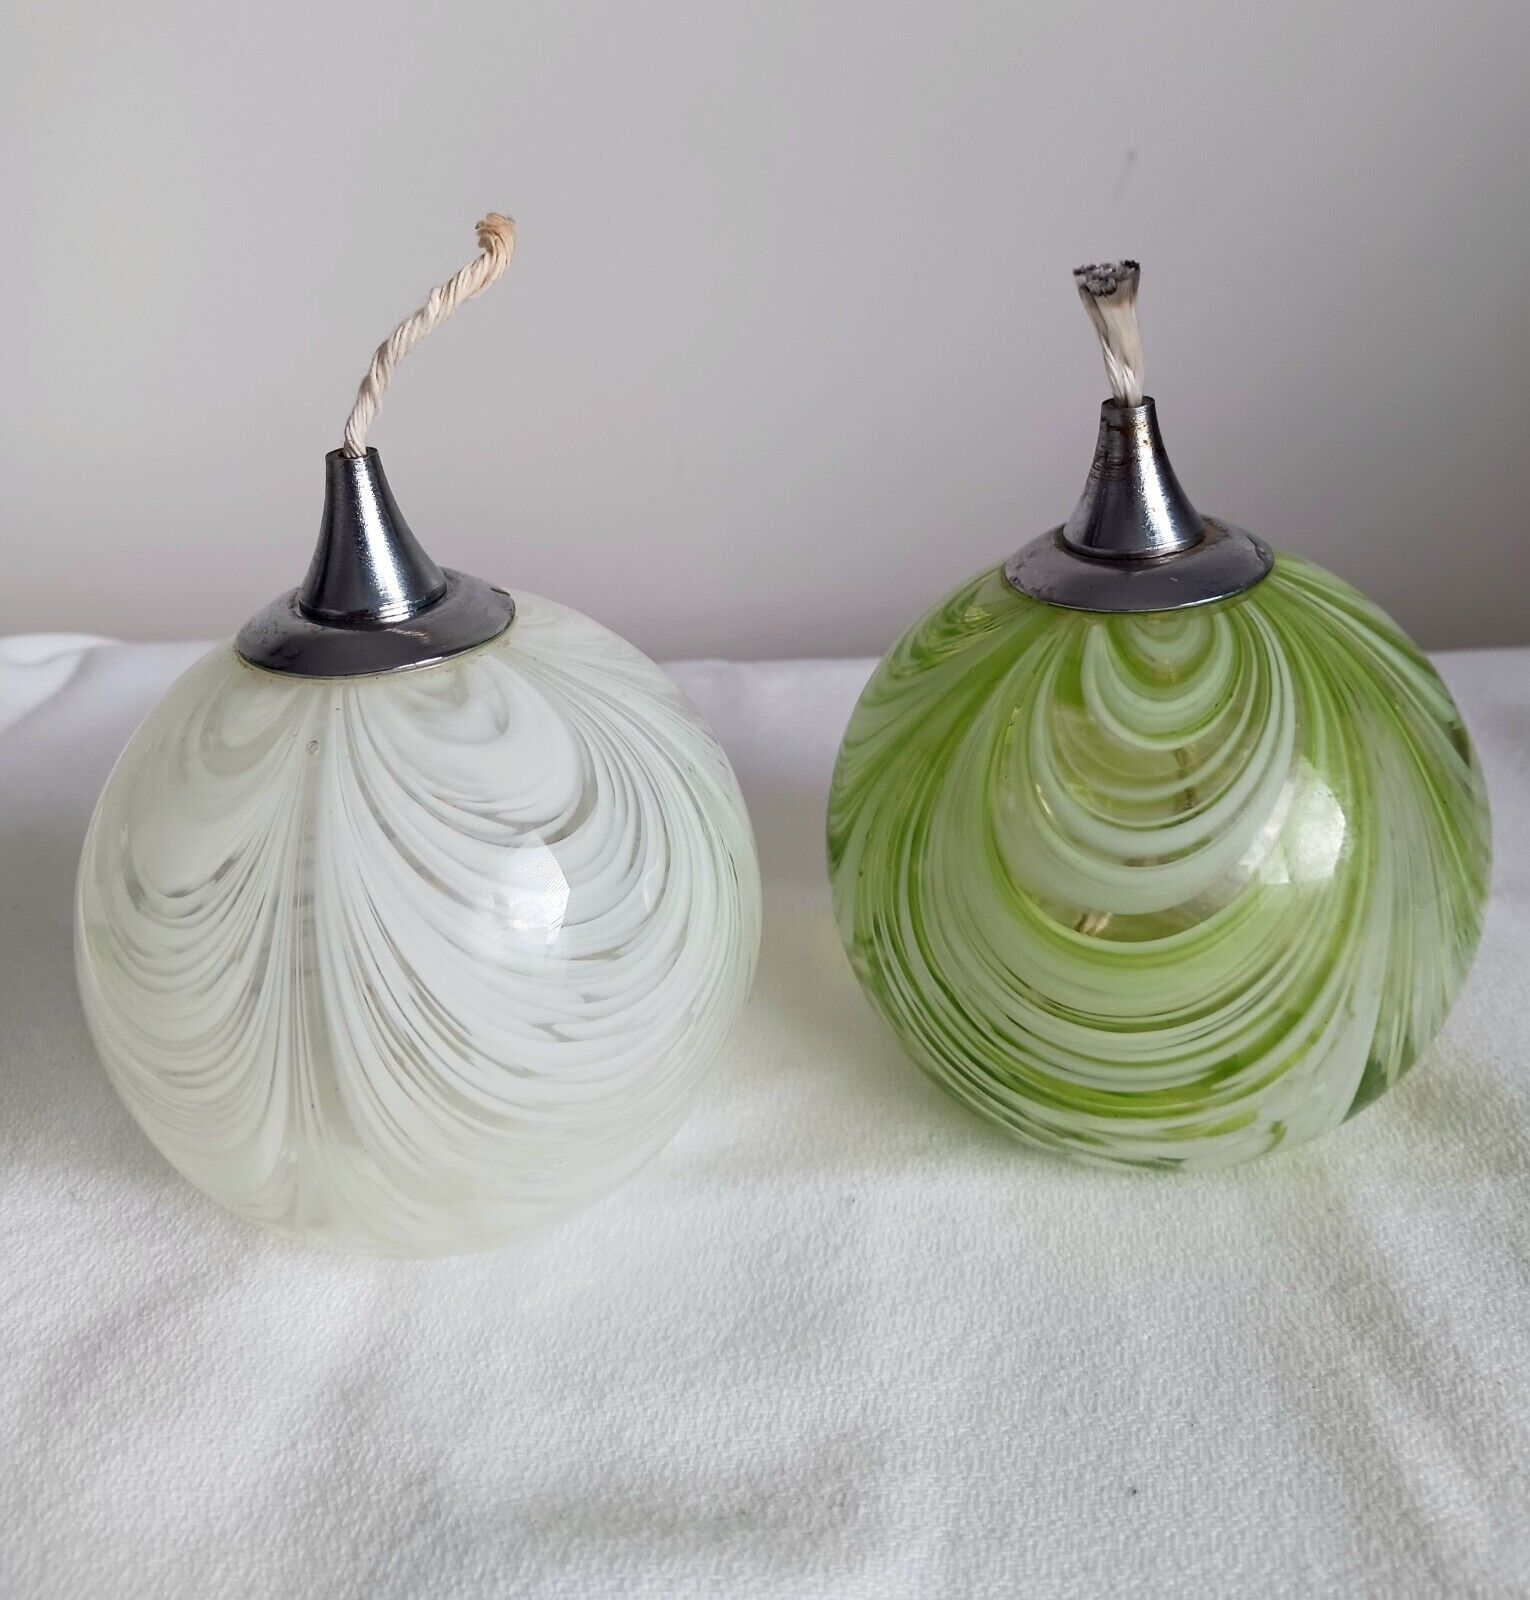 2 Vintage Swirl Glass Oil Lamps Blown Glass Green and White Pair